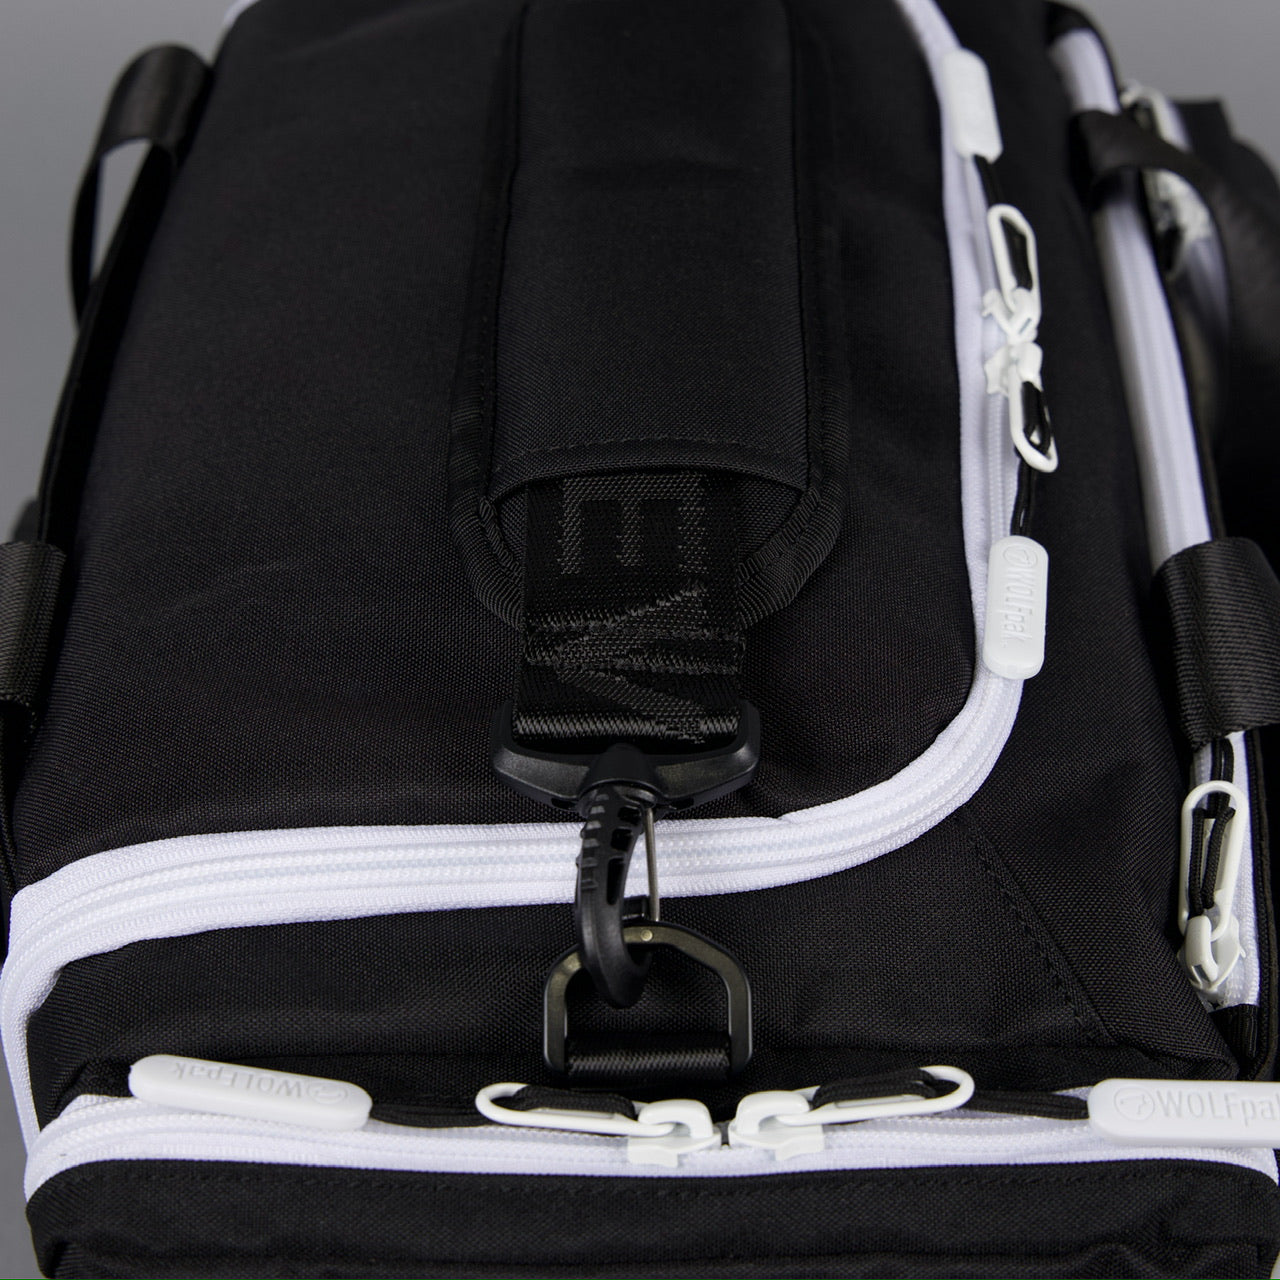 20L Mini Duffle Bag Black with White Accents